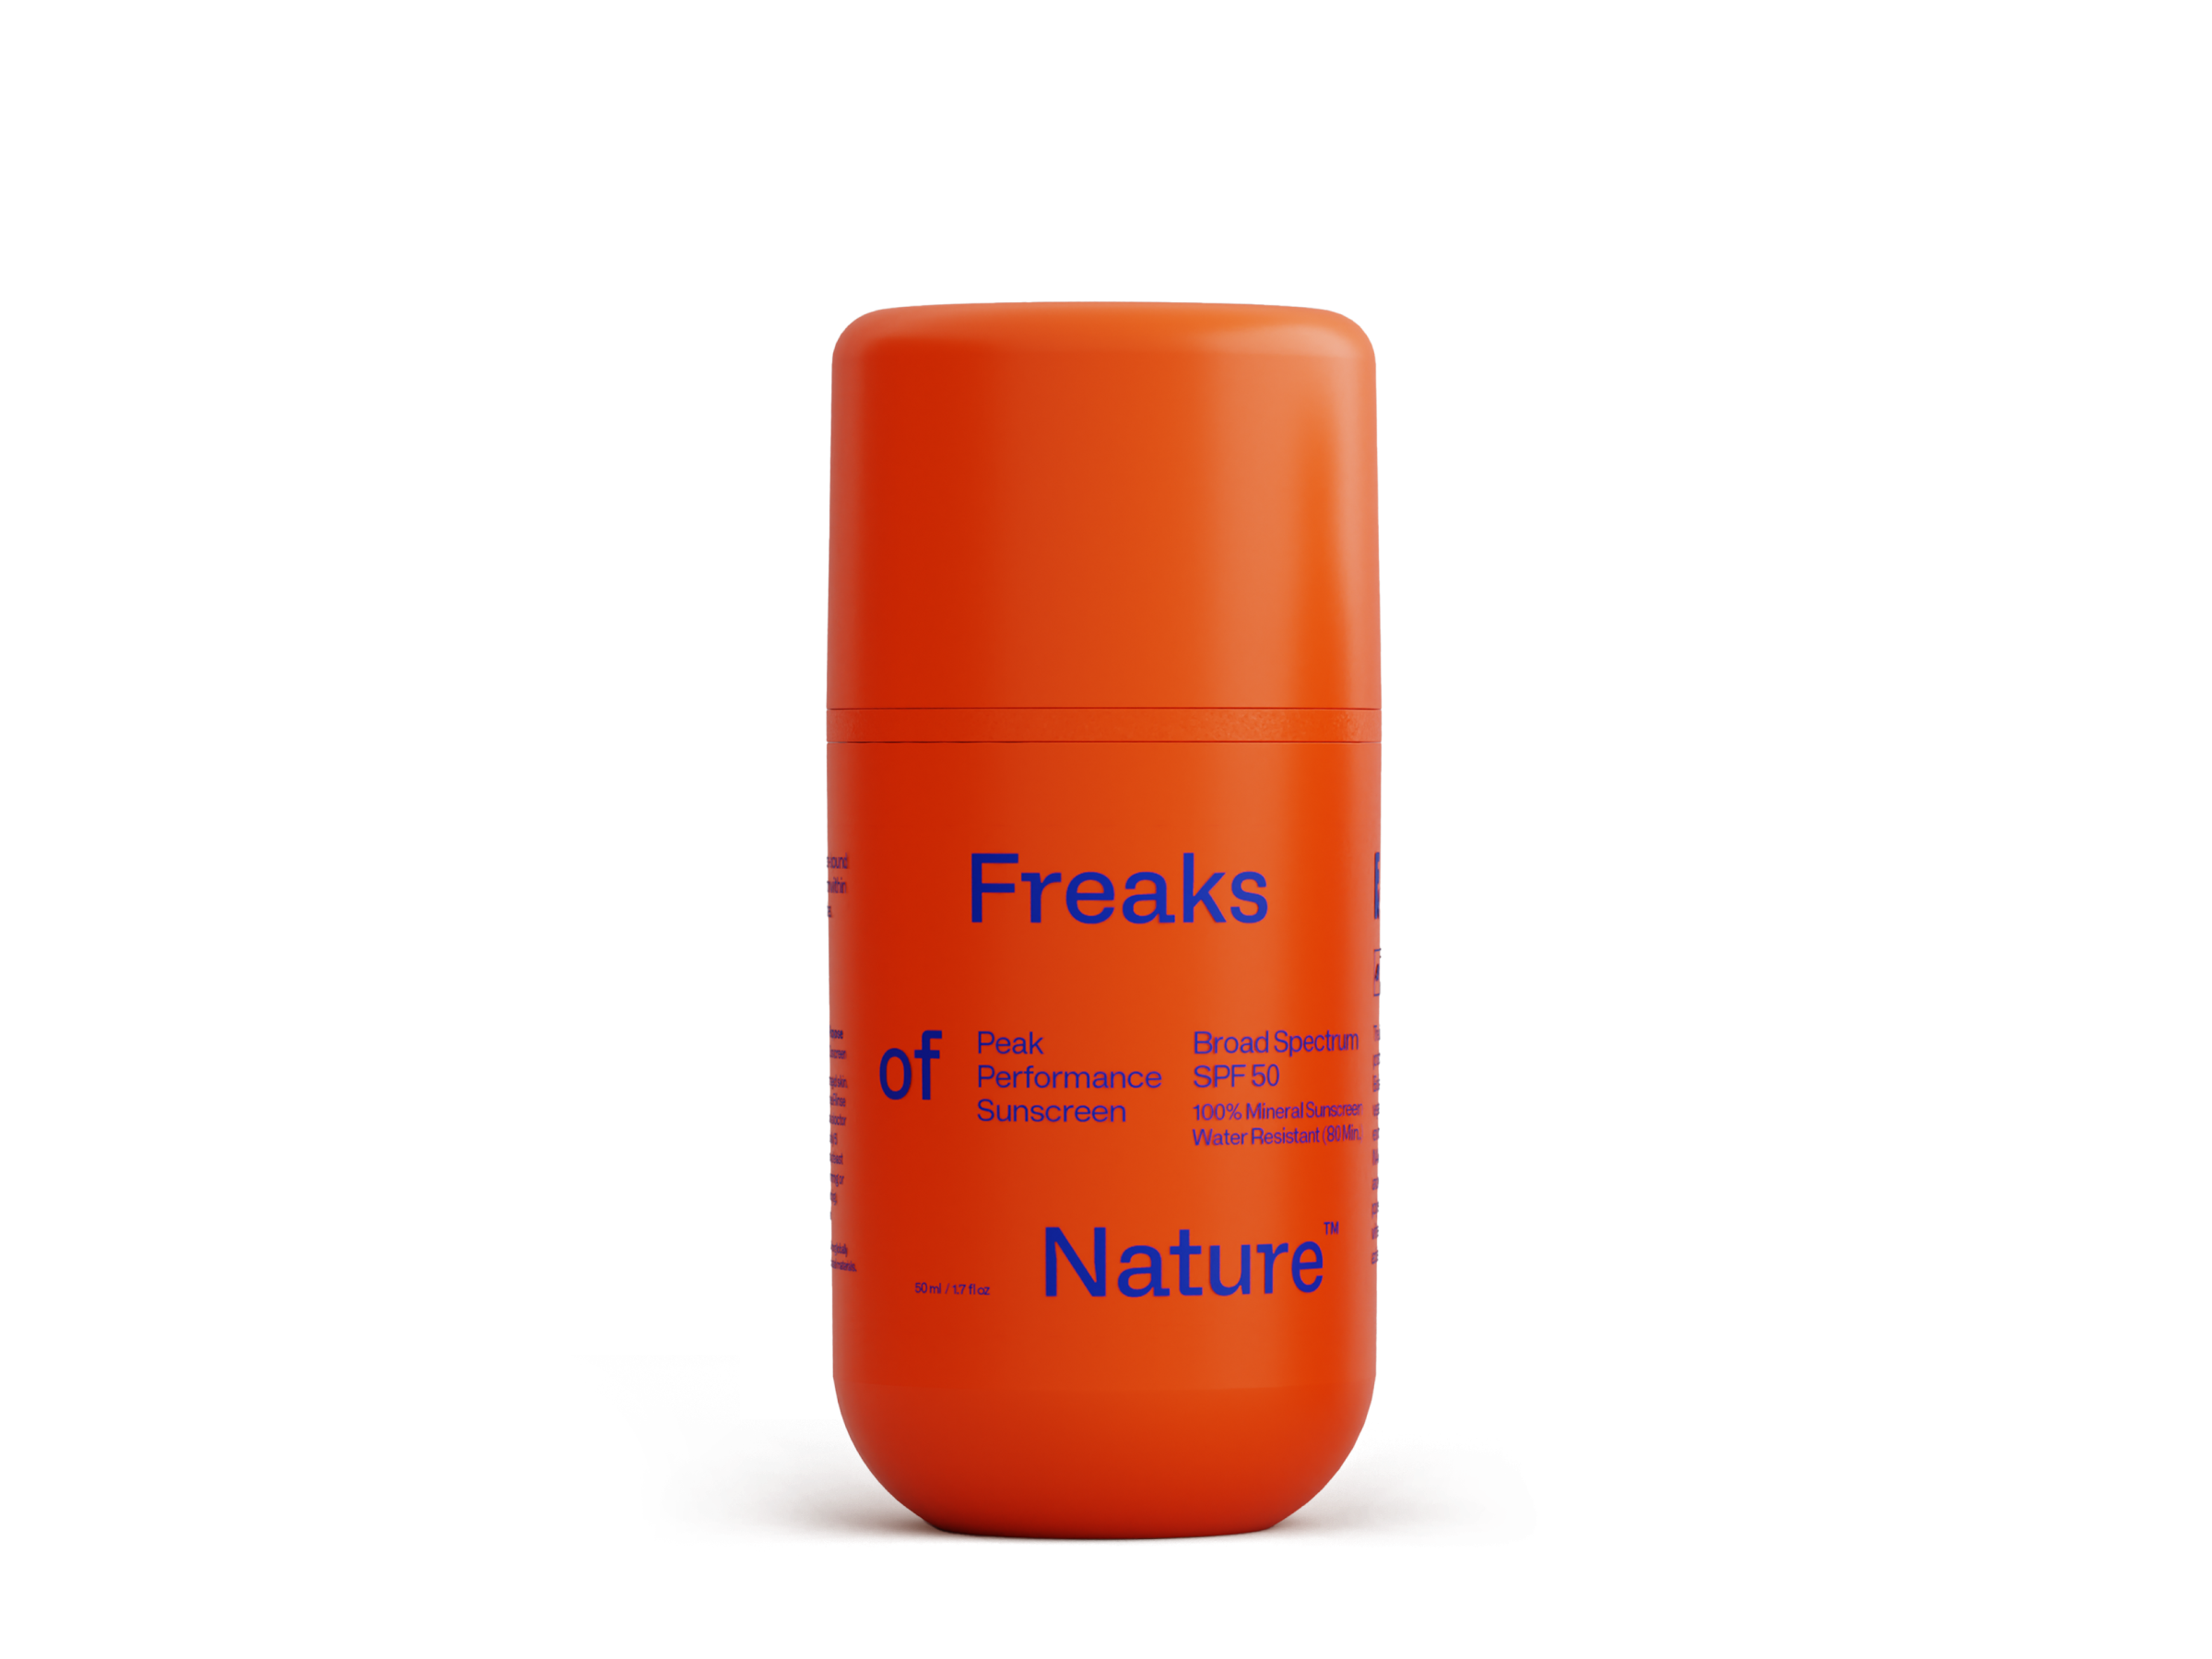 An orange bottle of sunscreen labeled "Freaks of Nature Skincare." The text on the bottle highlights that it is Peak Performance SPF50, offering high performance and water resistance, and includes vegan spider silk protein to protect against environmental stressors.